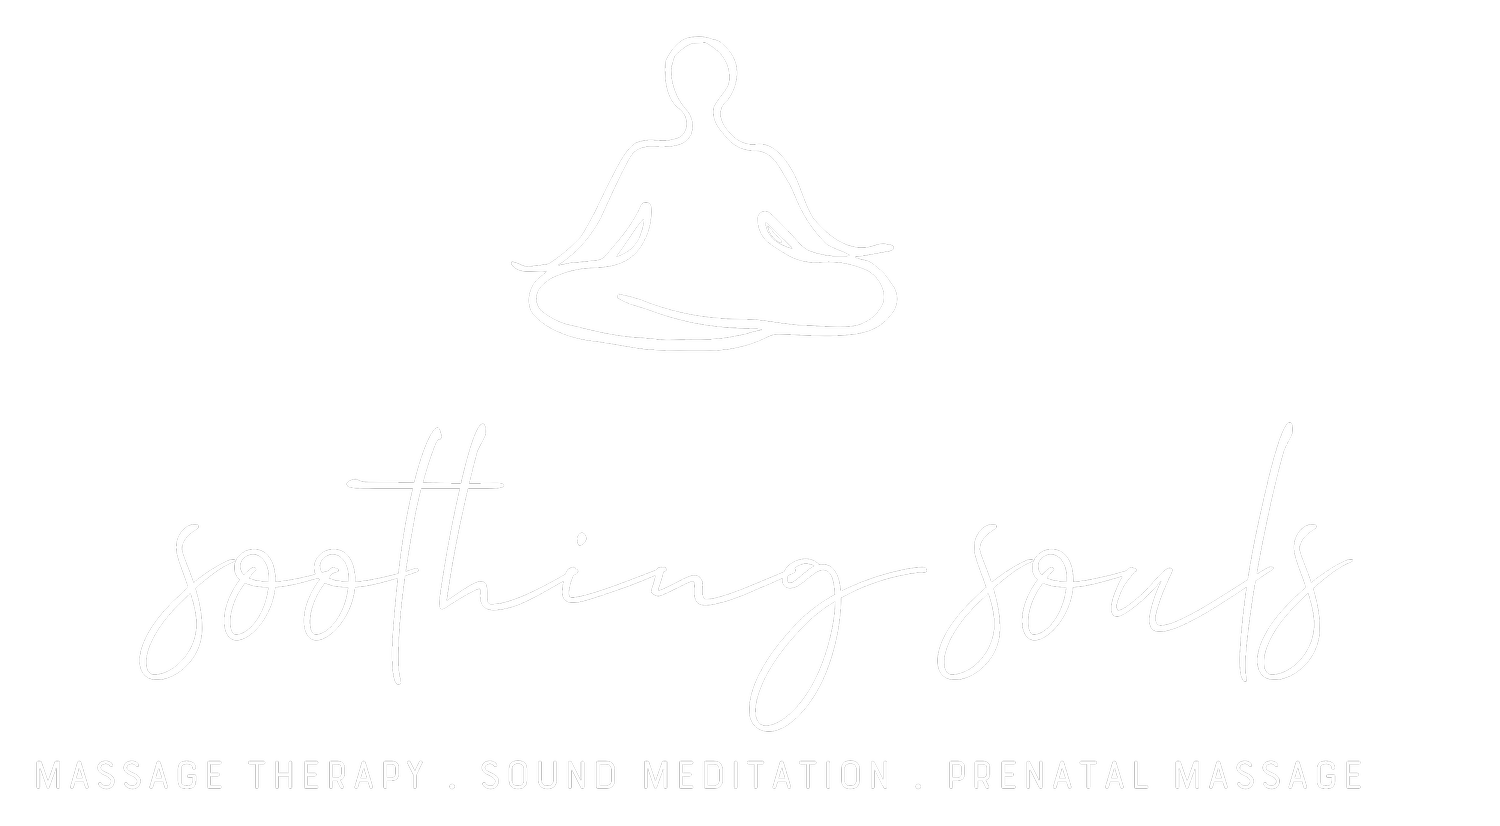 Soothing Souls Massage Therapy